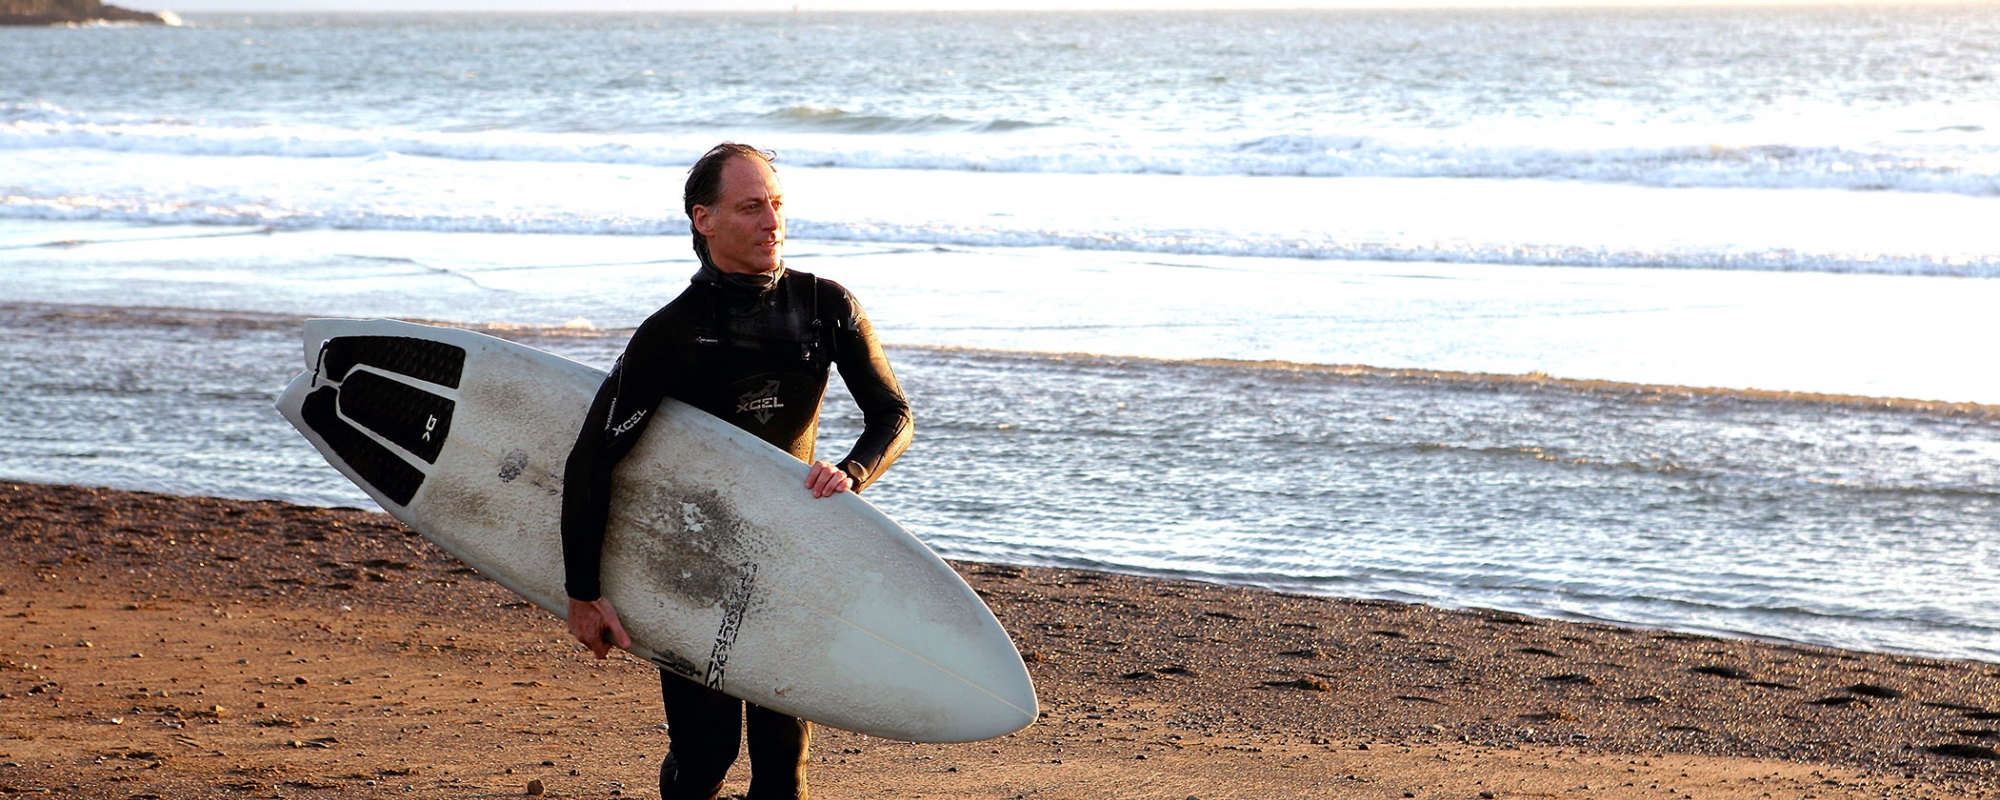 Dr. Bradly with surfboard